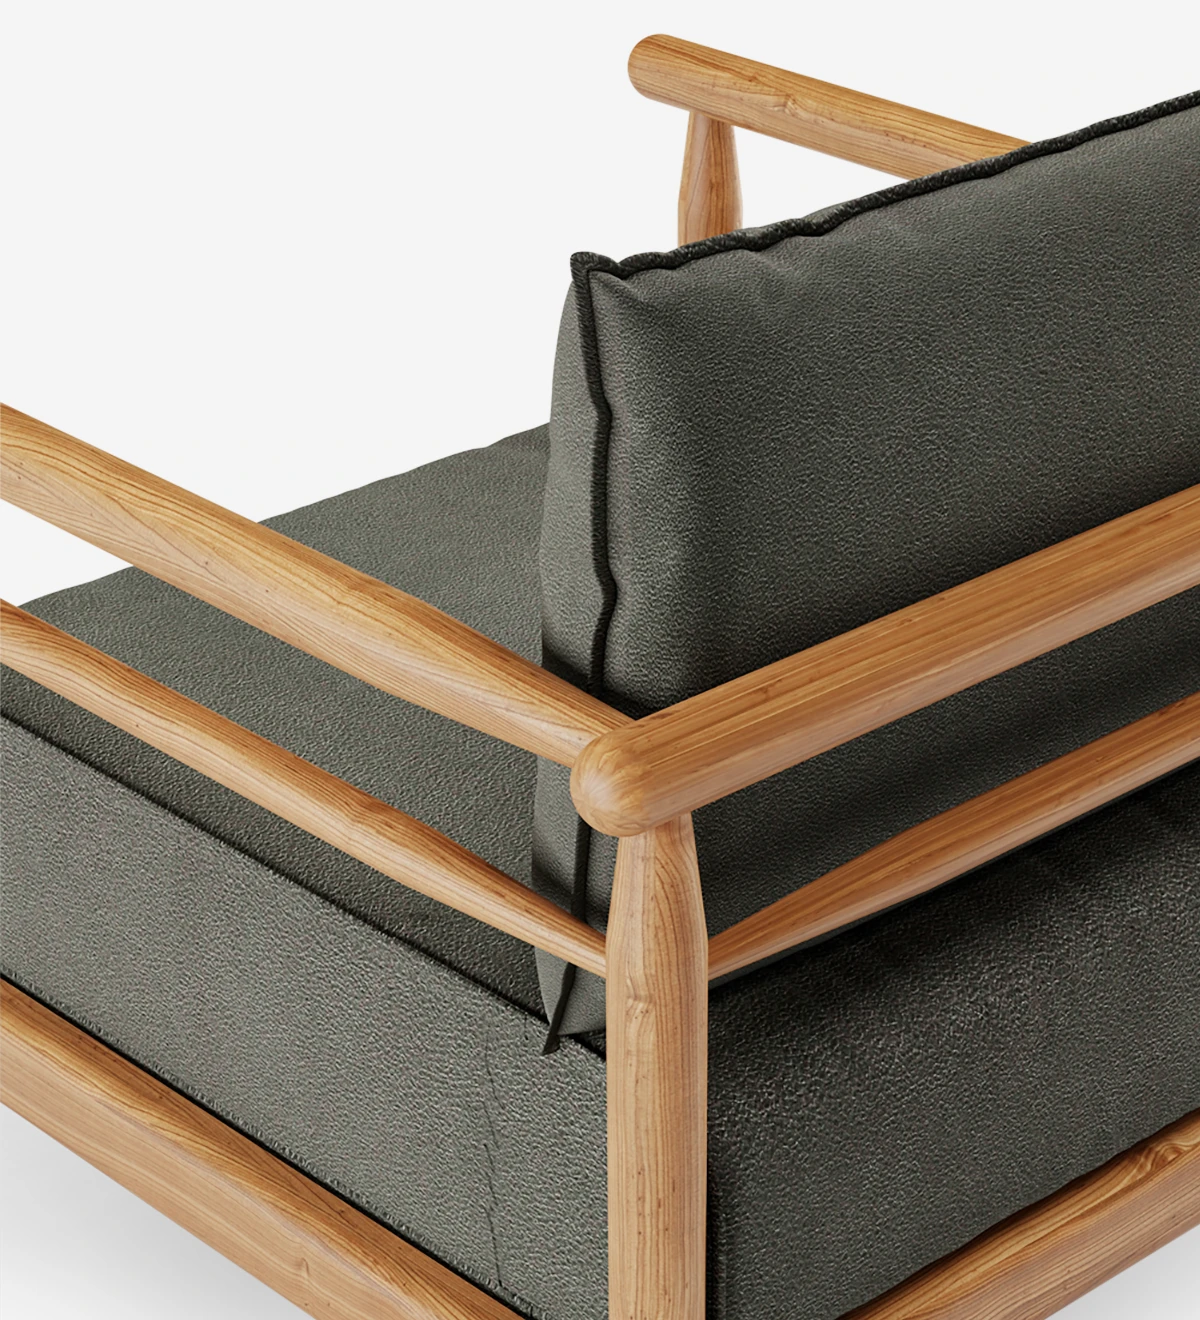 Maple with fabric upholstered cushions and natural wood frame